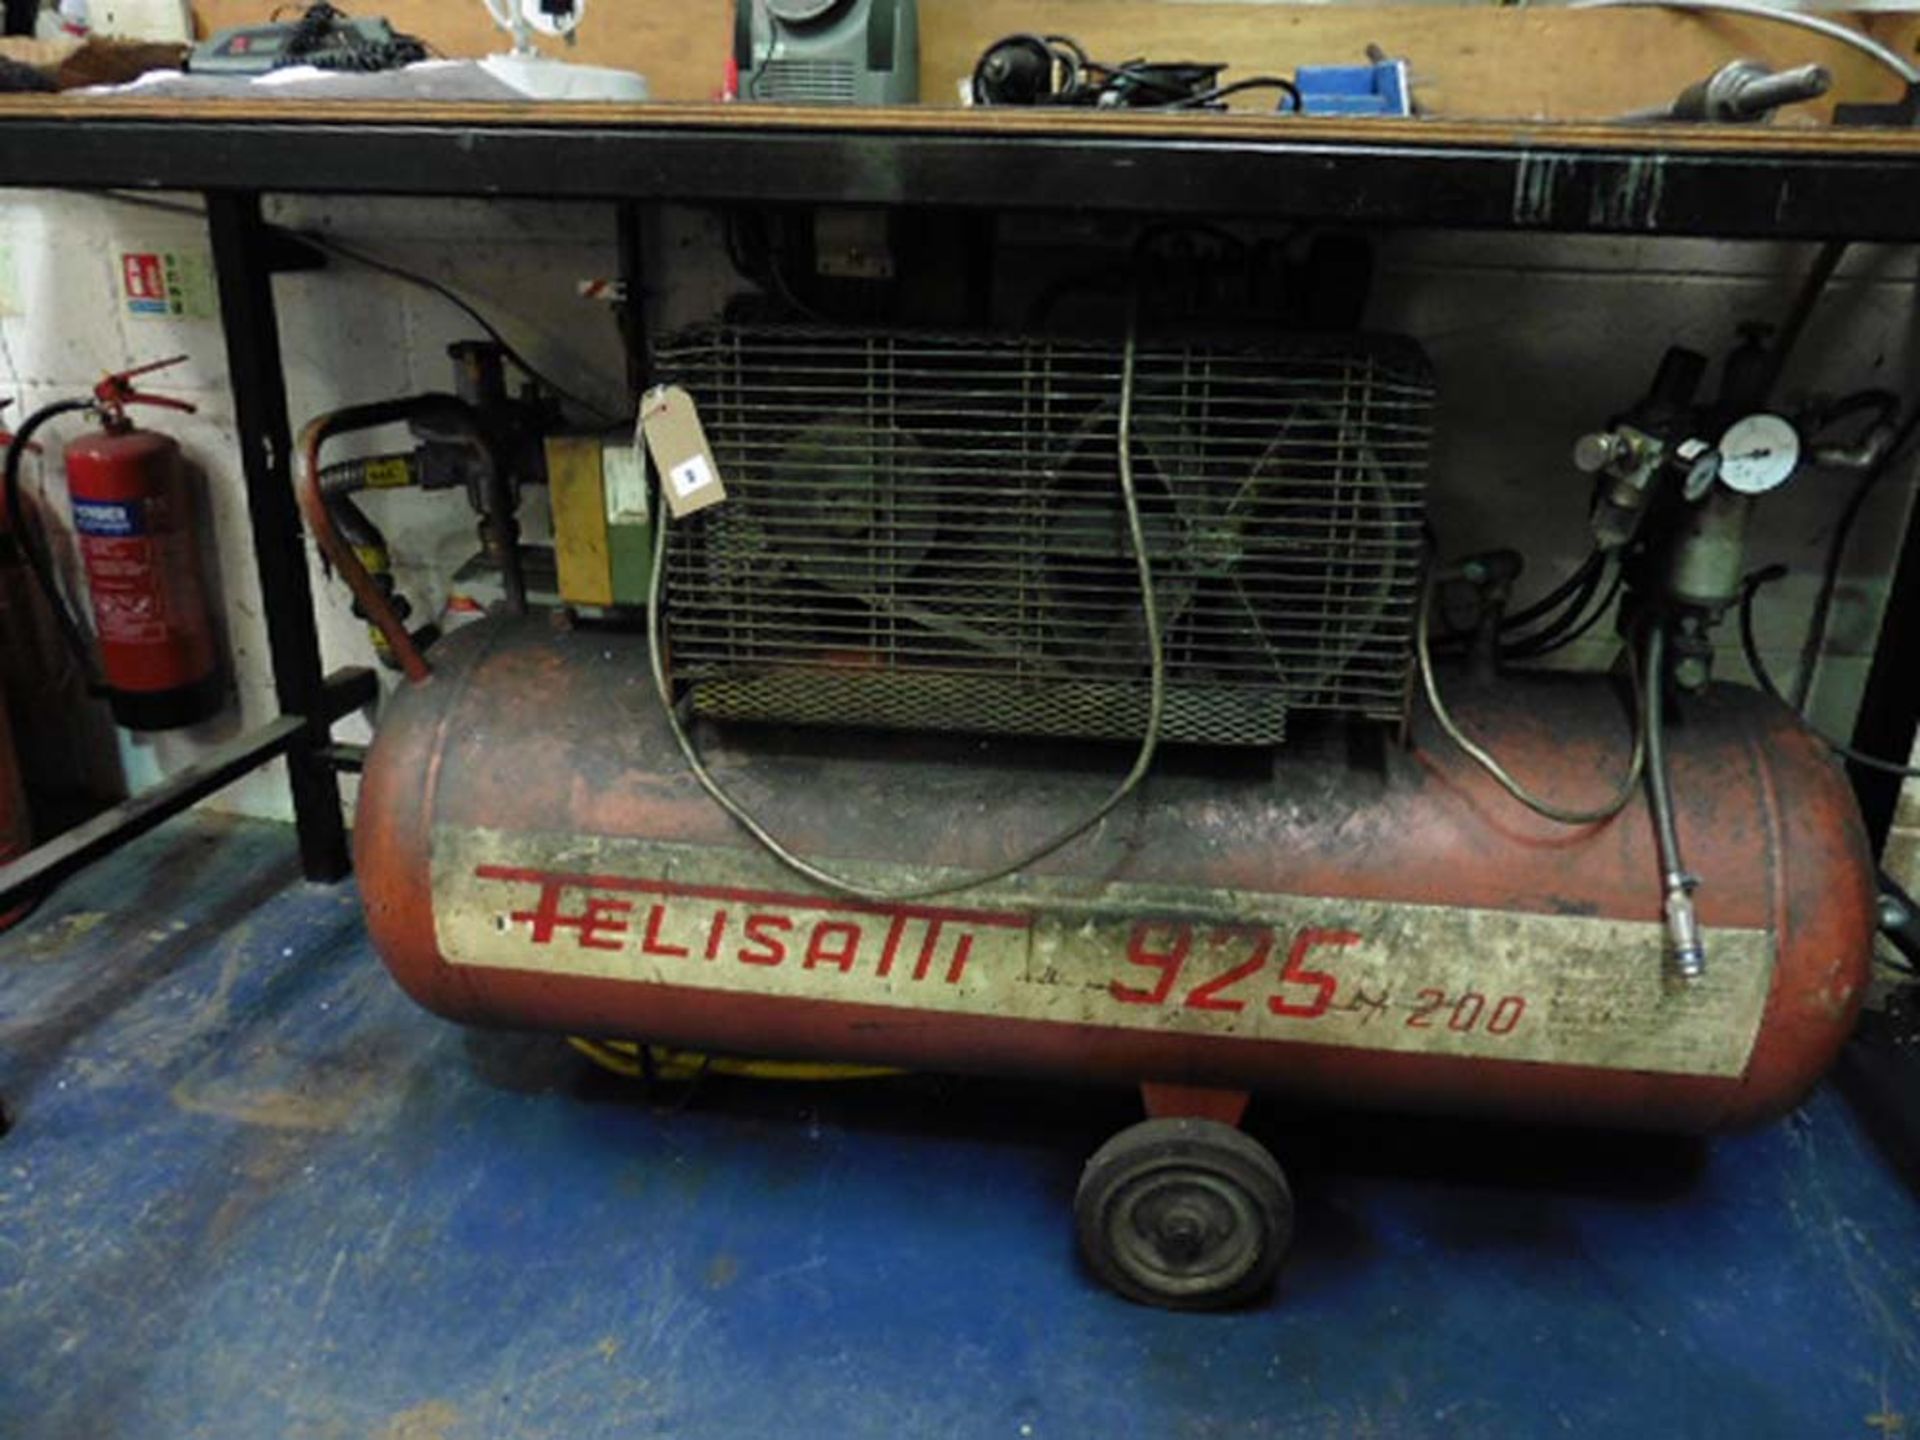 Felisatti model 925/200 3 phase reciever mounted air compressor on wheels with associated airline